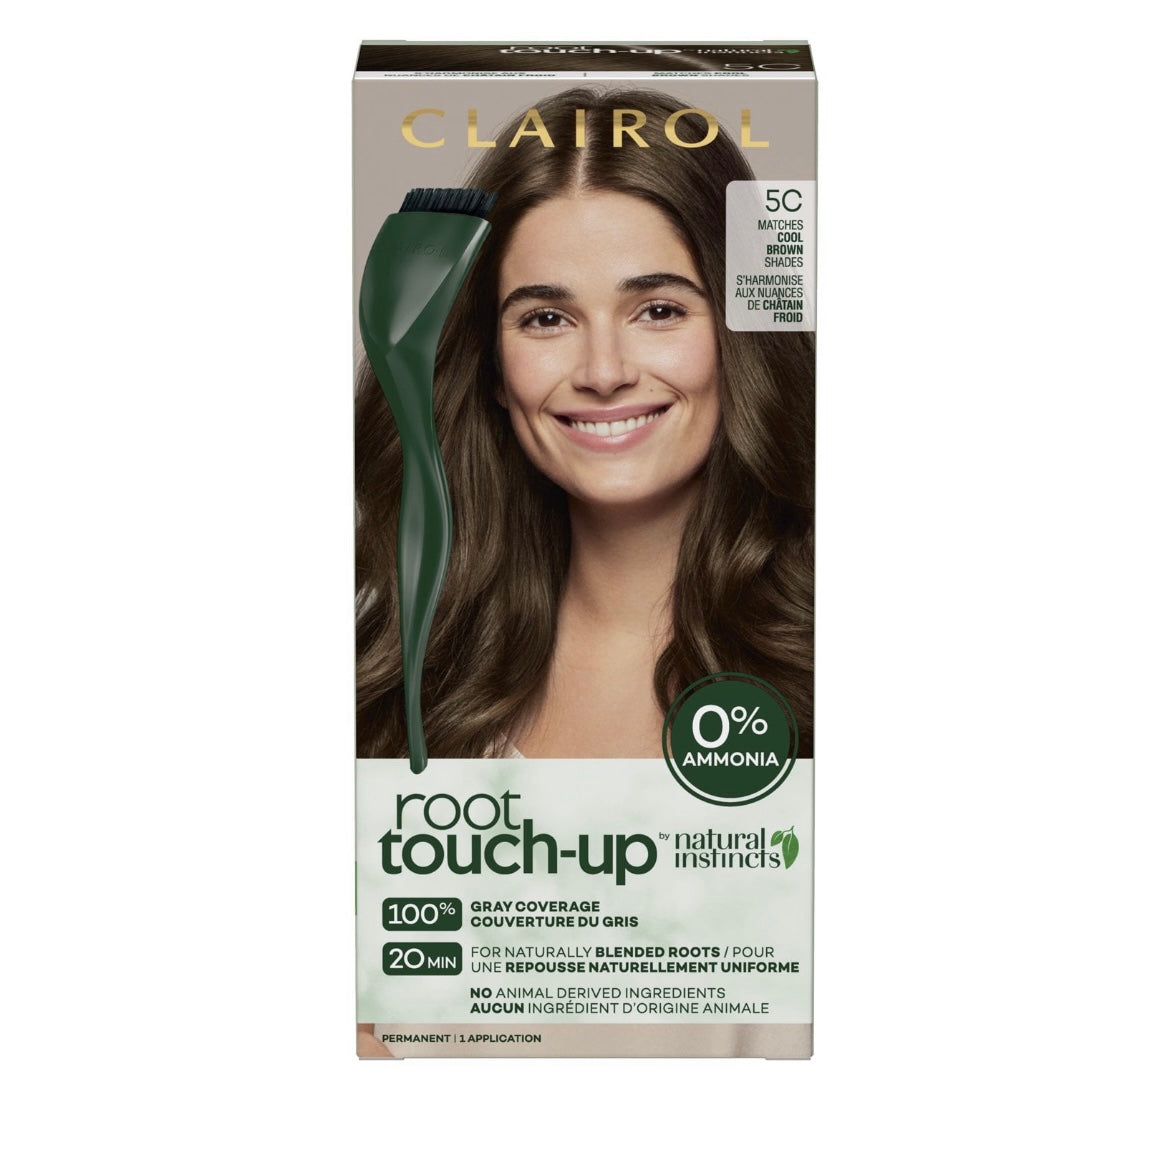 Clairol Natural Instincts Root Touch-Up Permanent Hair Color Creme, Hair Dye, 1 Application